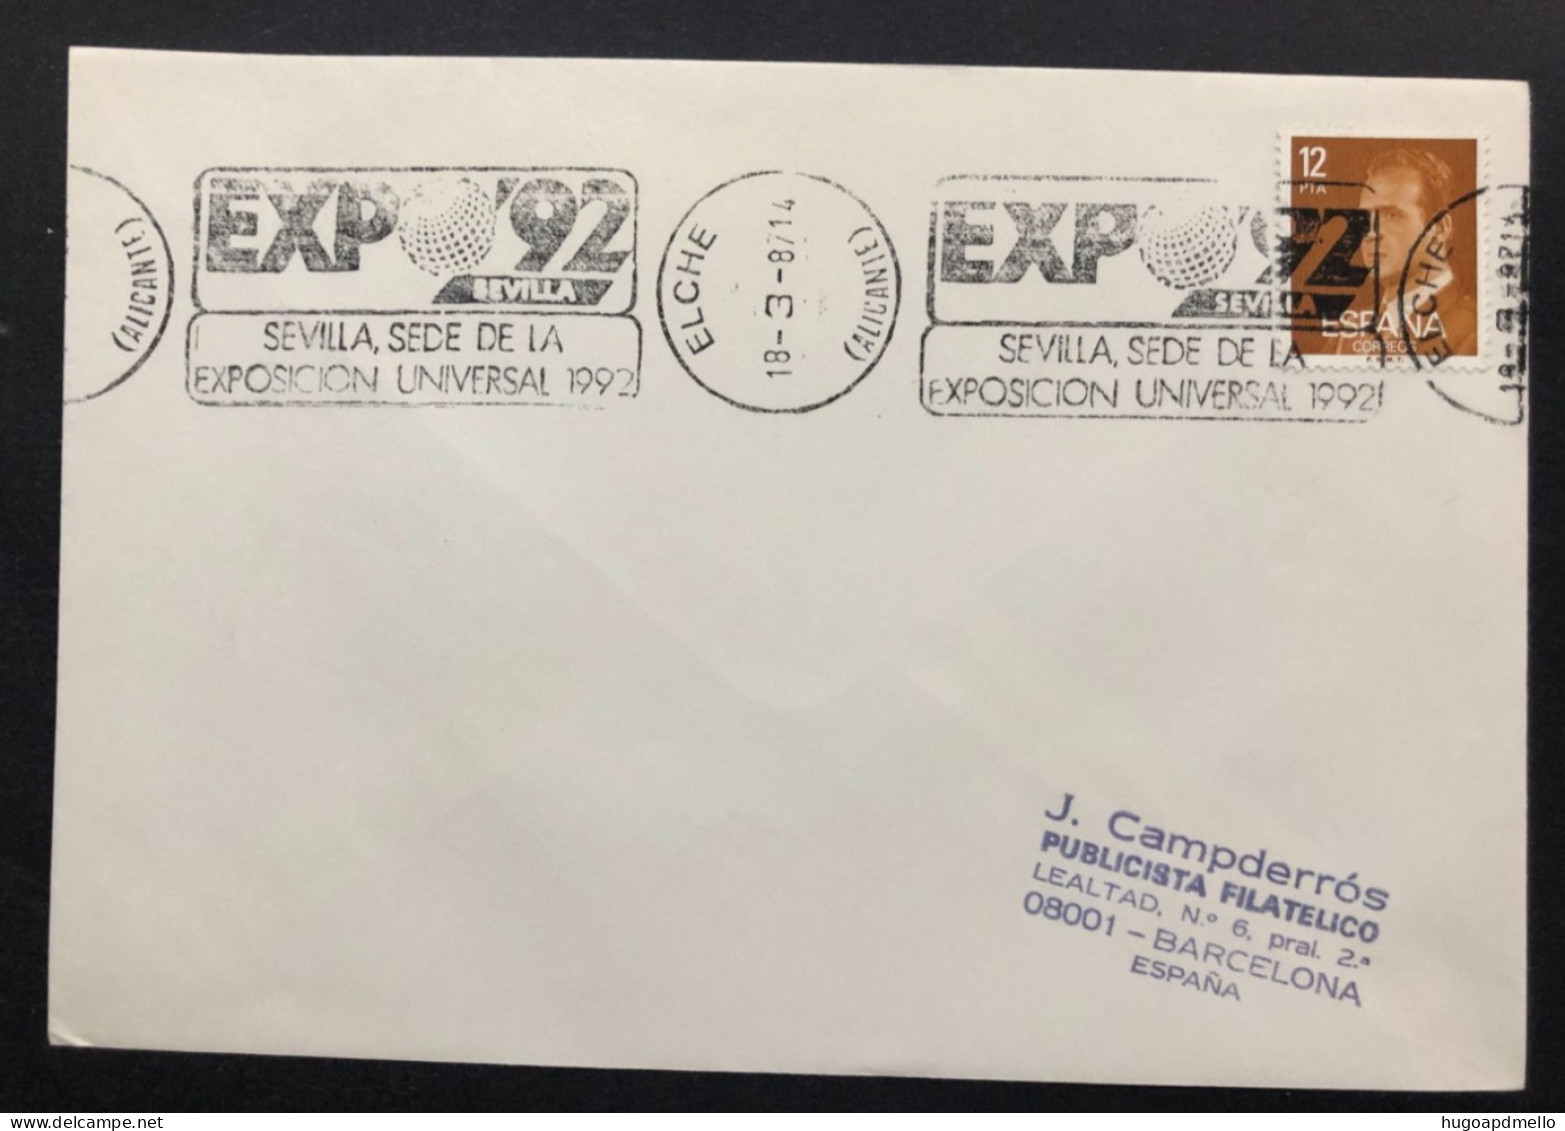 SPAIN, Cover With Special Cancellation « EXPO '92 », « ELCHE Postmark », 1987 - 1992 – Sevilla (Spain)